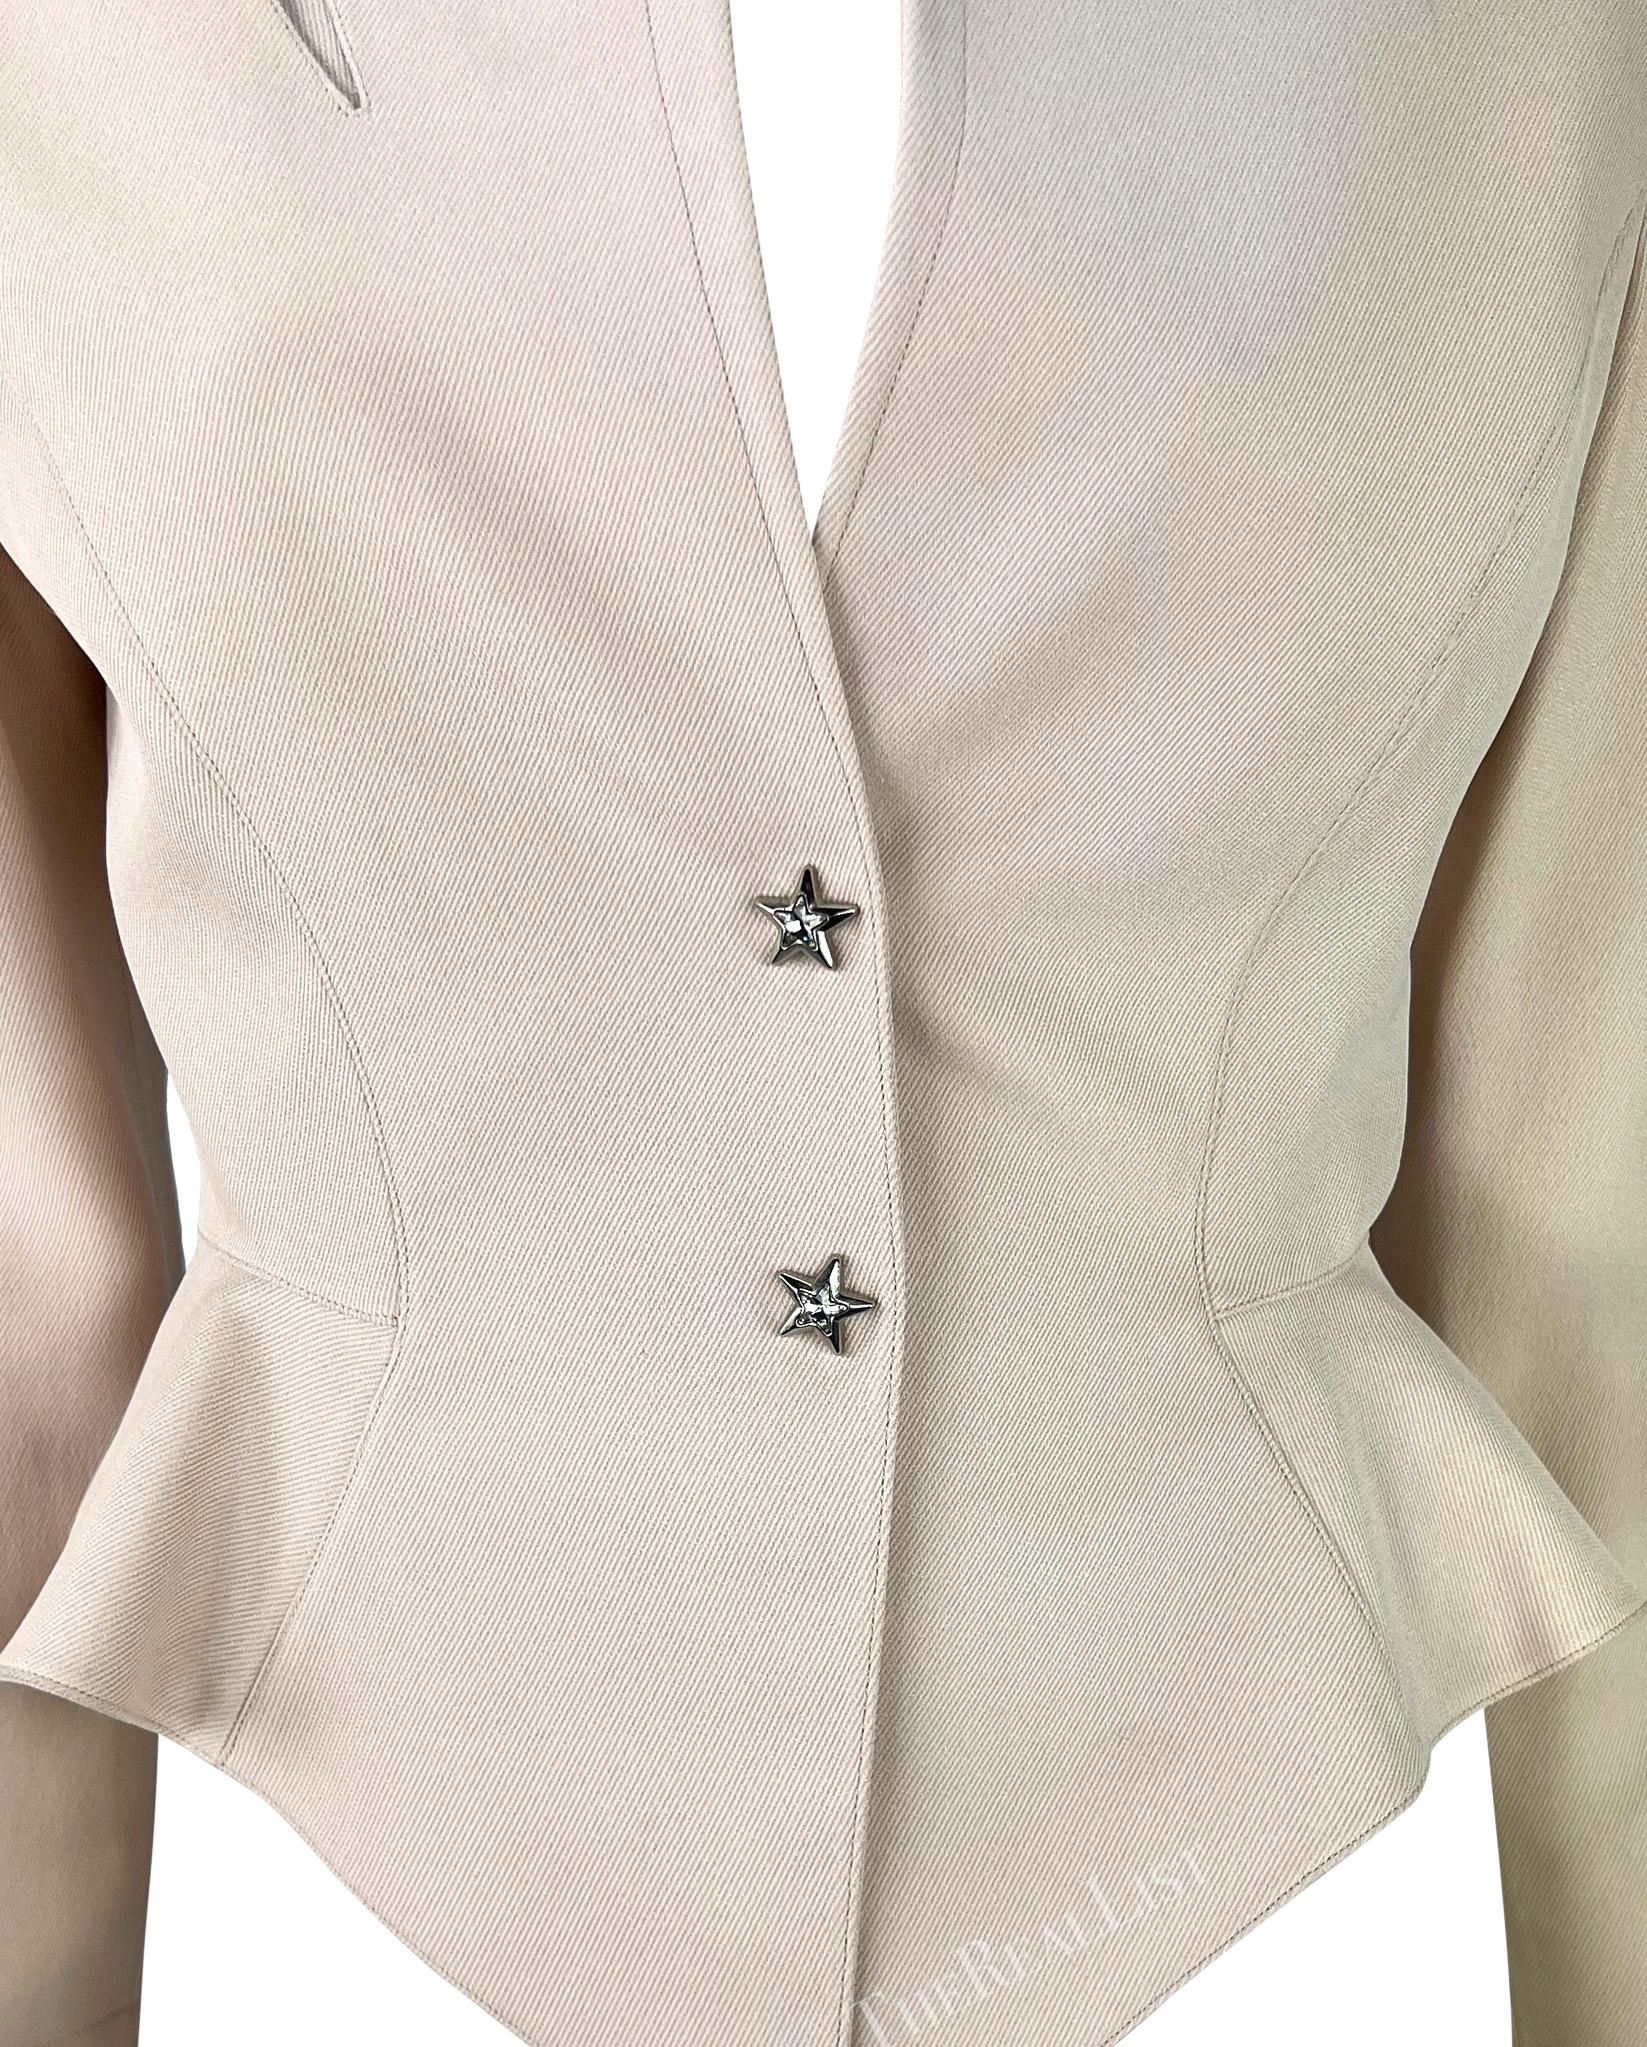 This light pink blazer by Thierry Mugler, designed by Manfred Mugler, is from the early 1990s. It has a sculpted look with a cinched waist, a light peplum, a small stand-up collar, and a plunging neckline. The shoulder features a lightning bolt